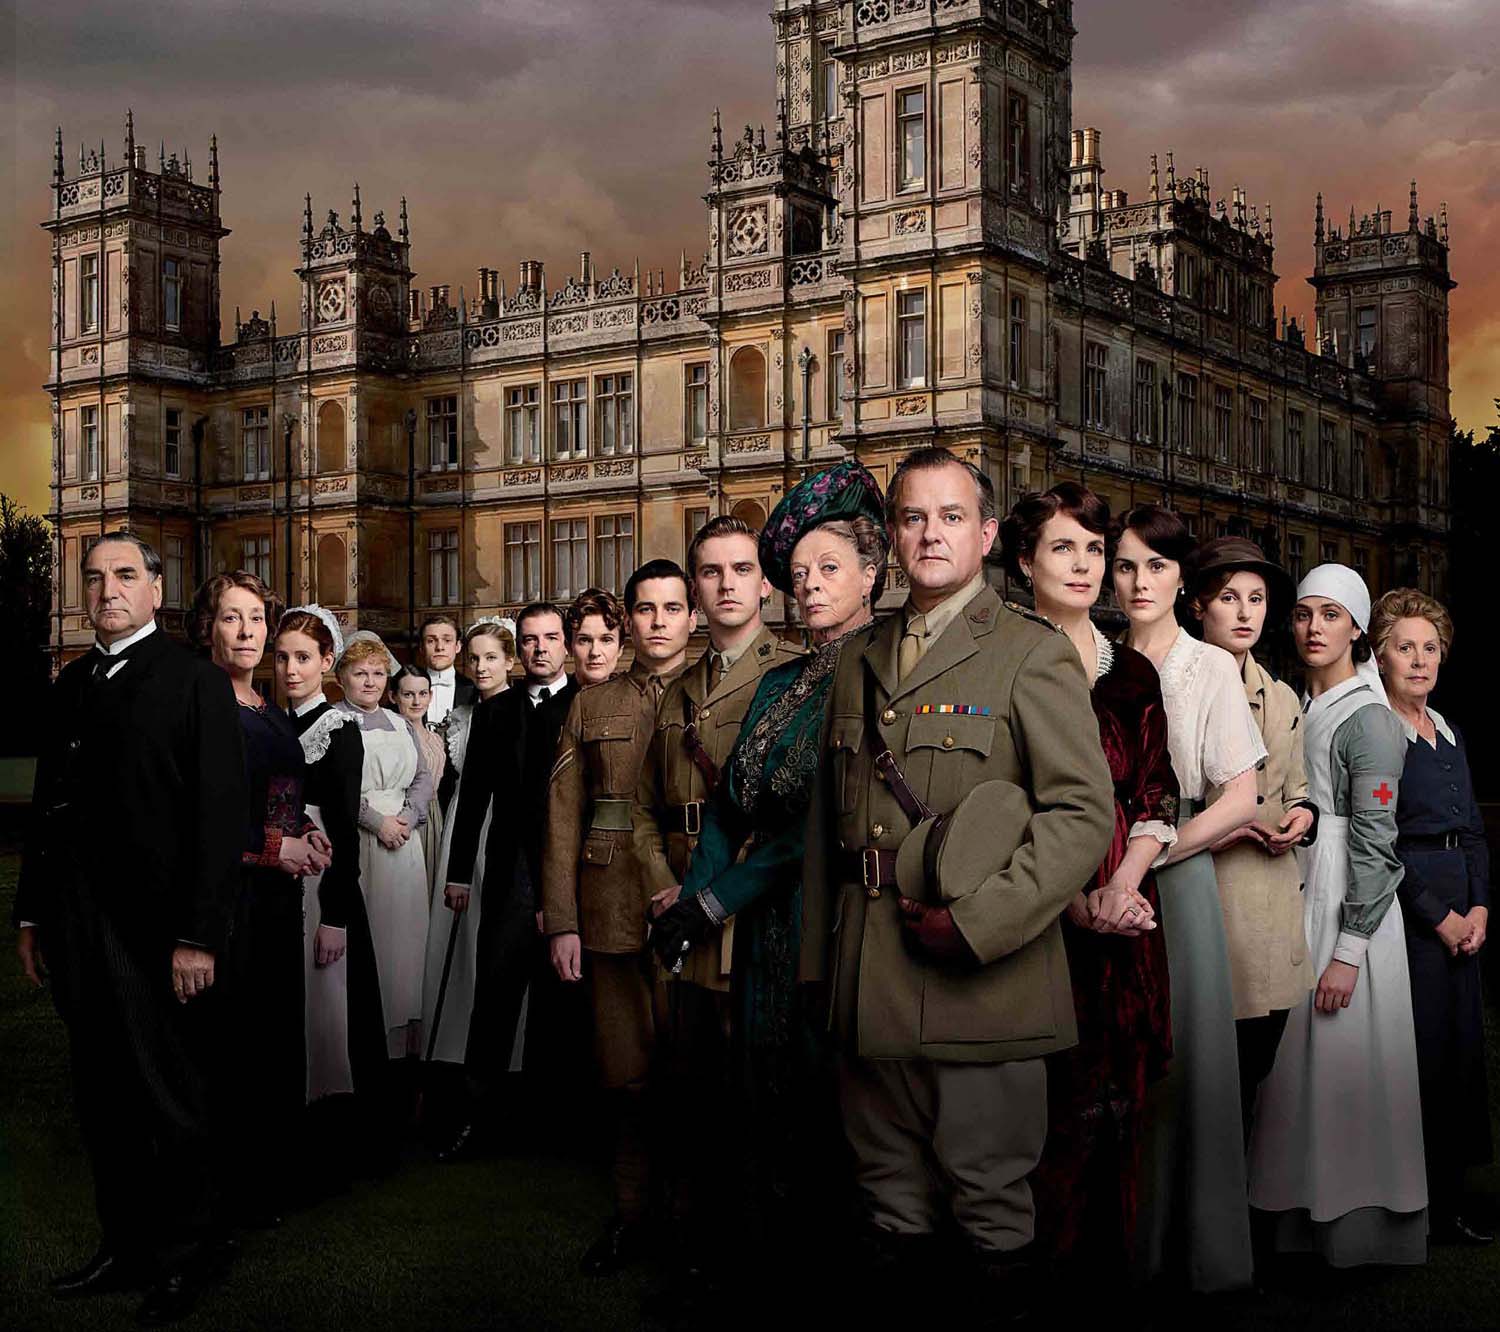 Where Can I Watch Full Episodes Of Downton Abbey Season 2